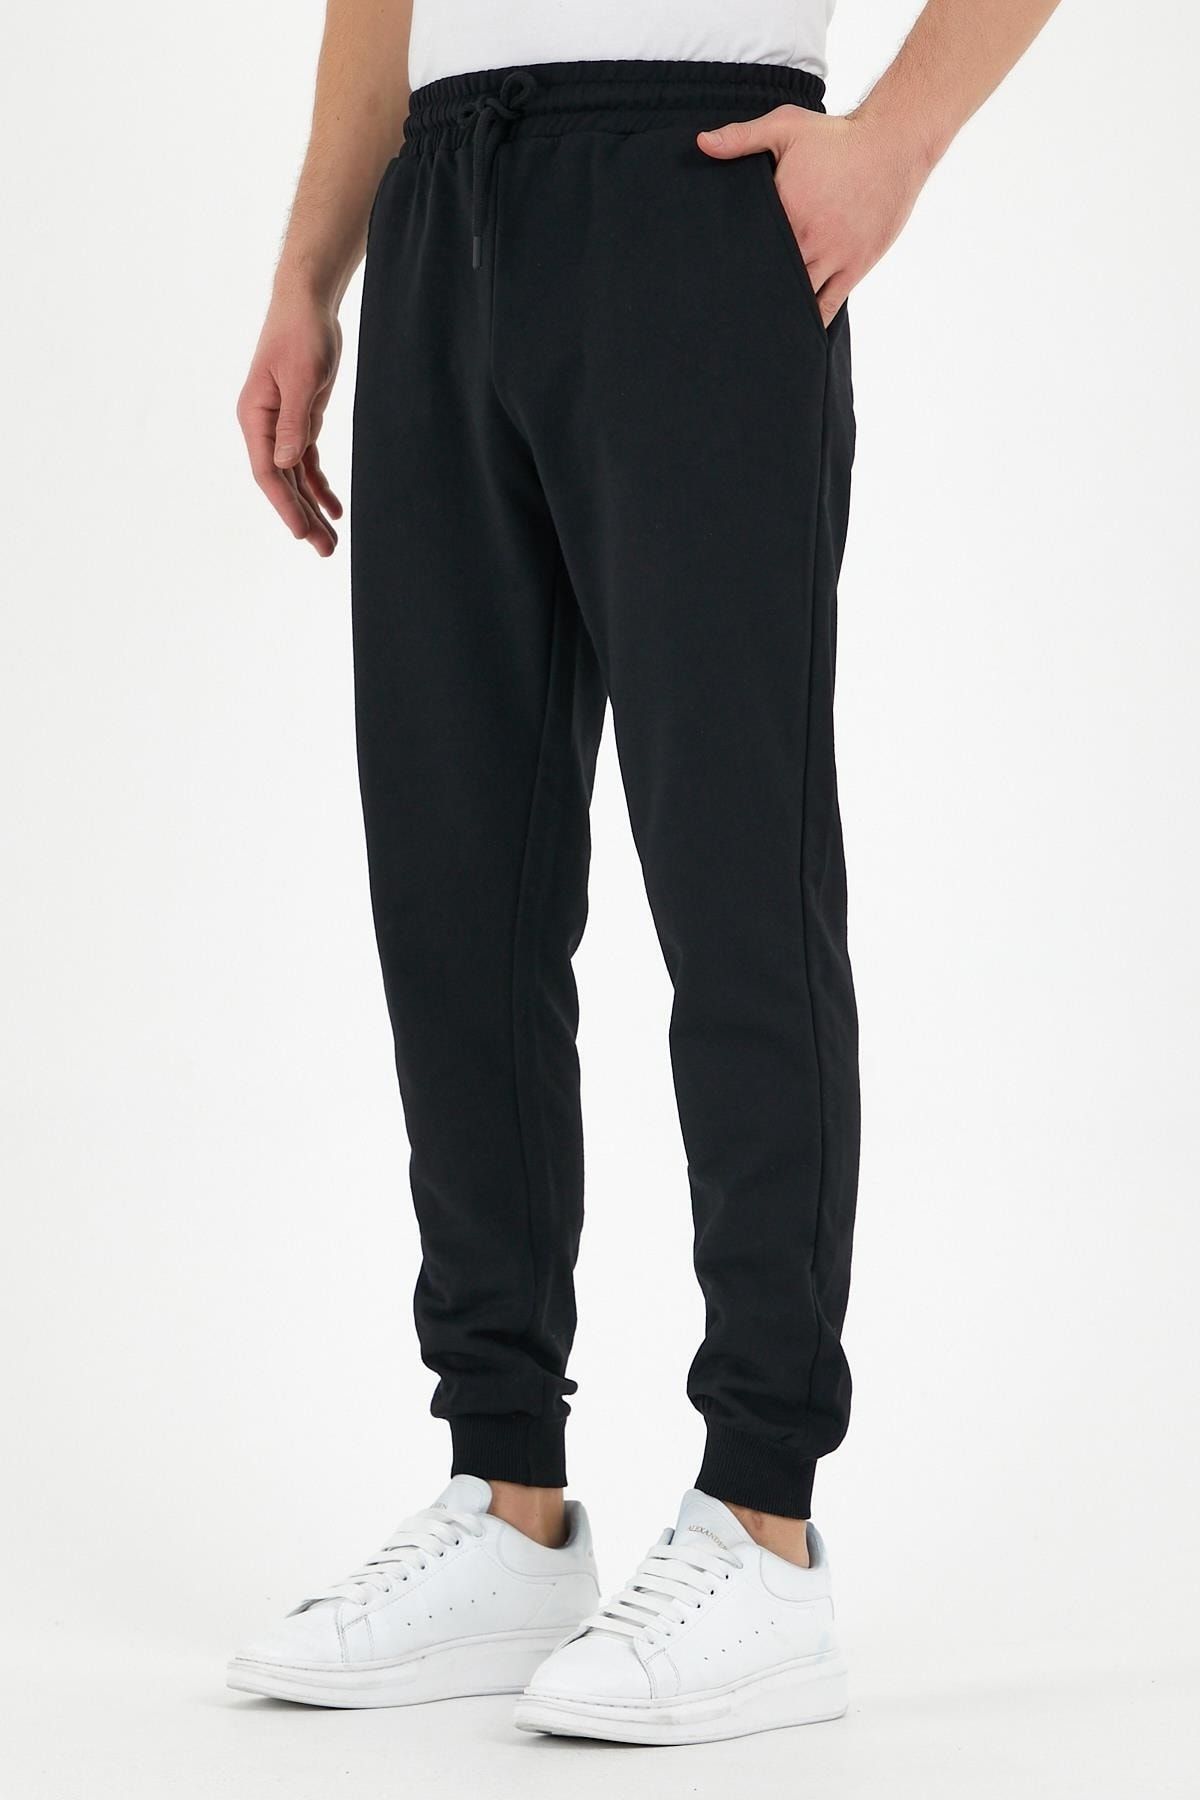 Men's Heavyweight Relaxed Fit Sweatpants